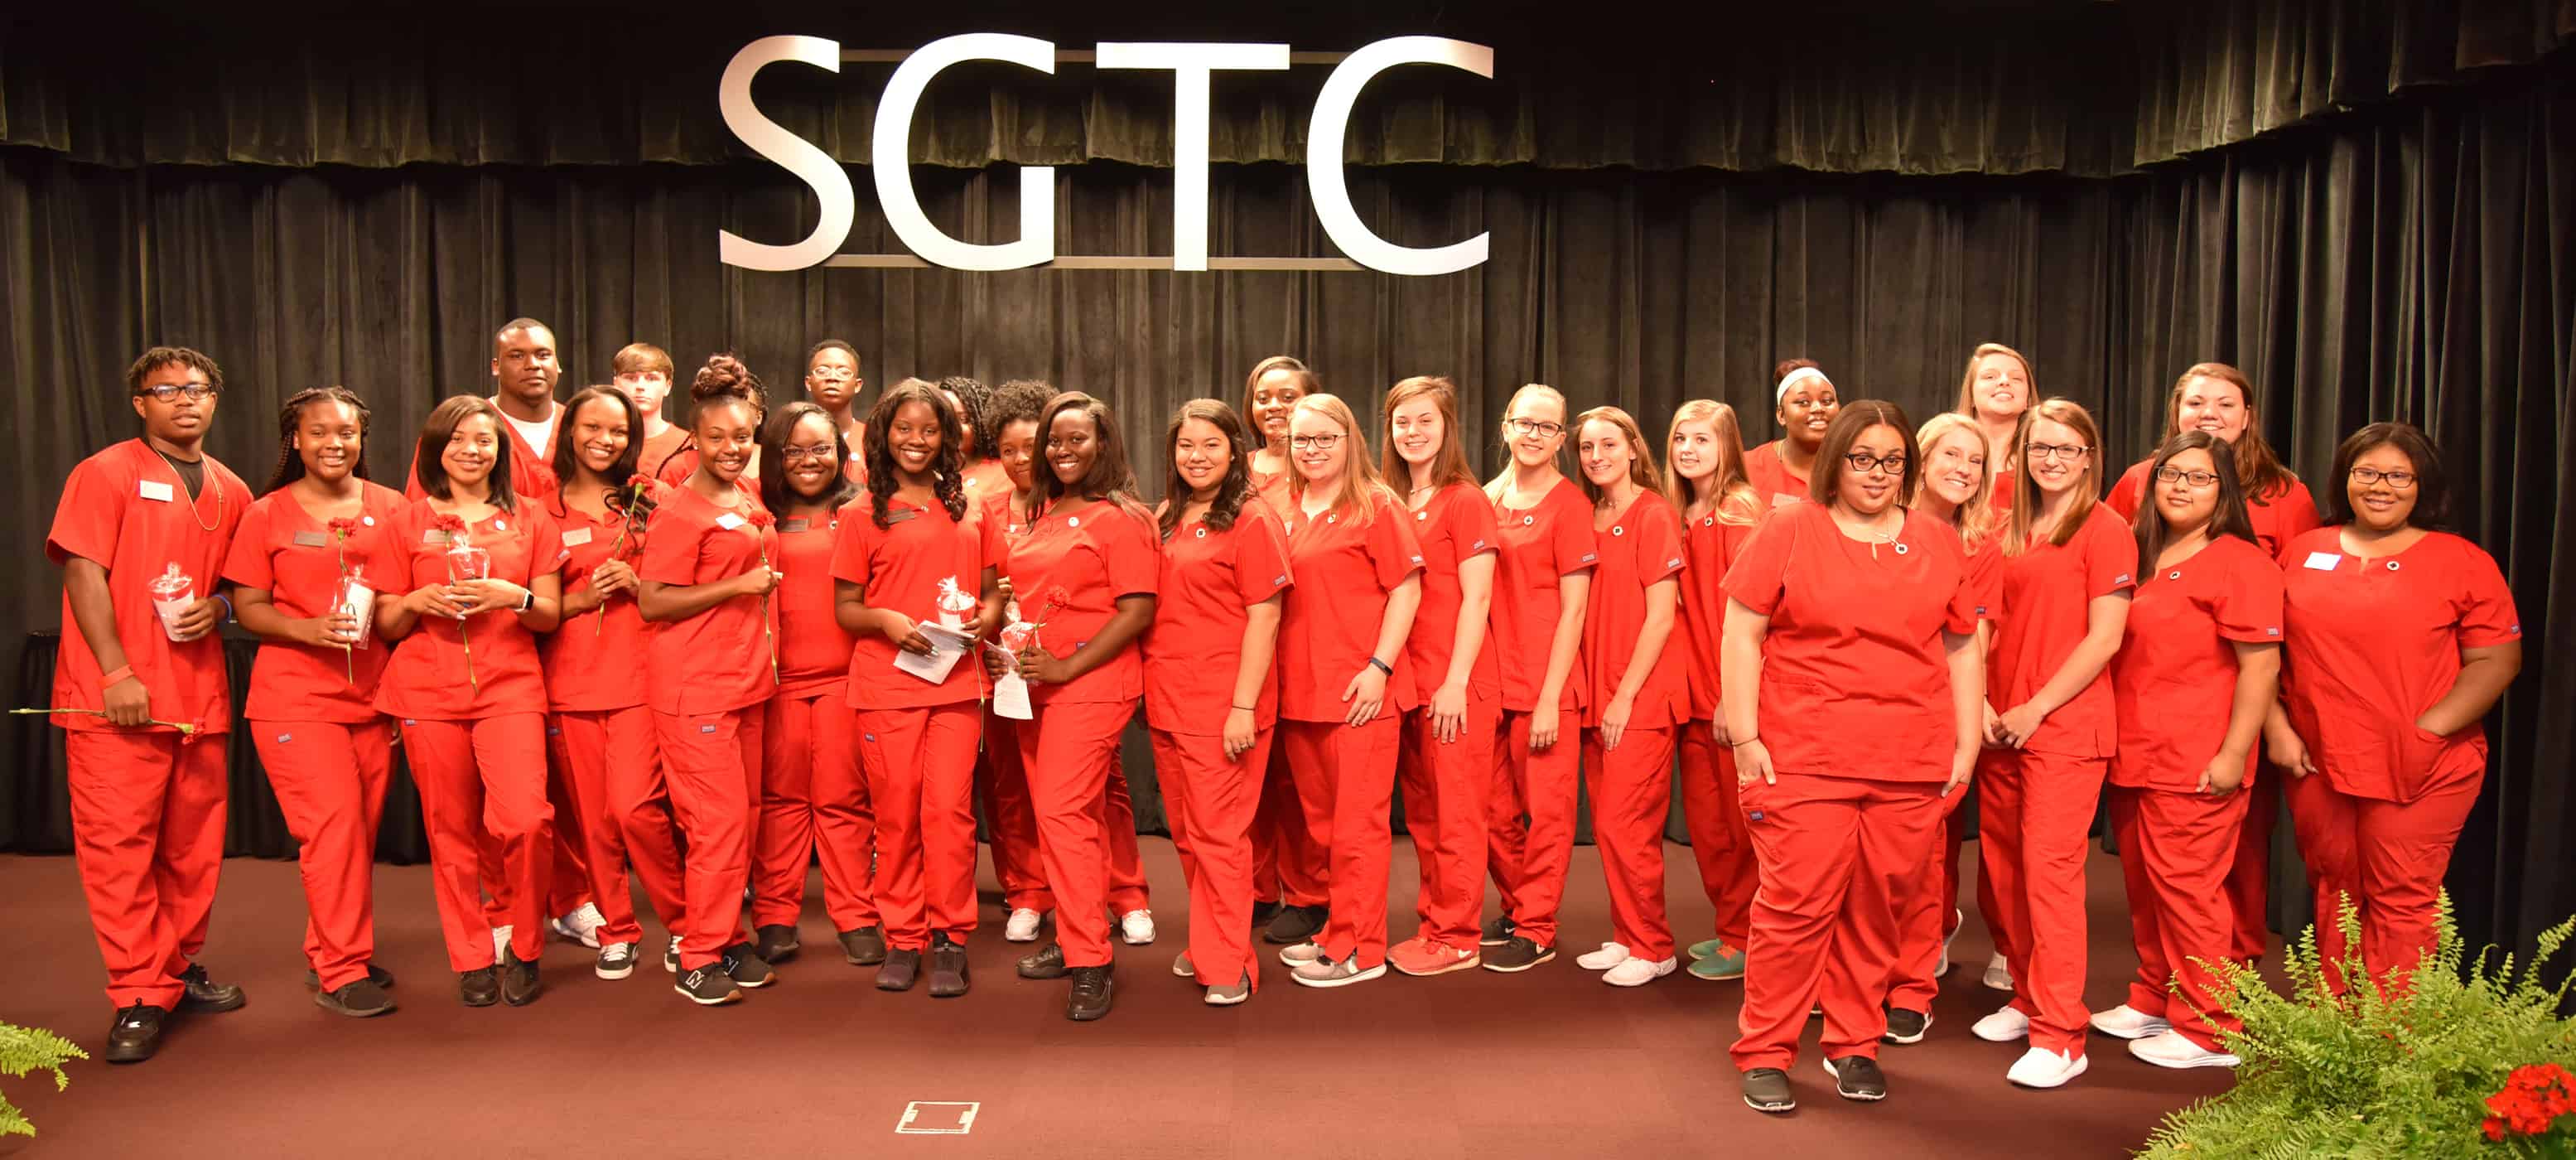 29 high school students stand on a stage wearing red scrubs.